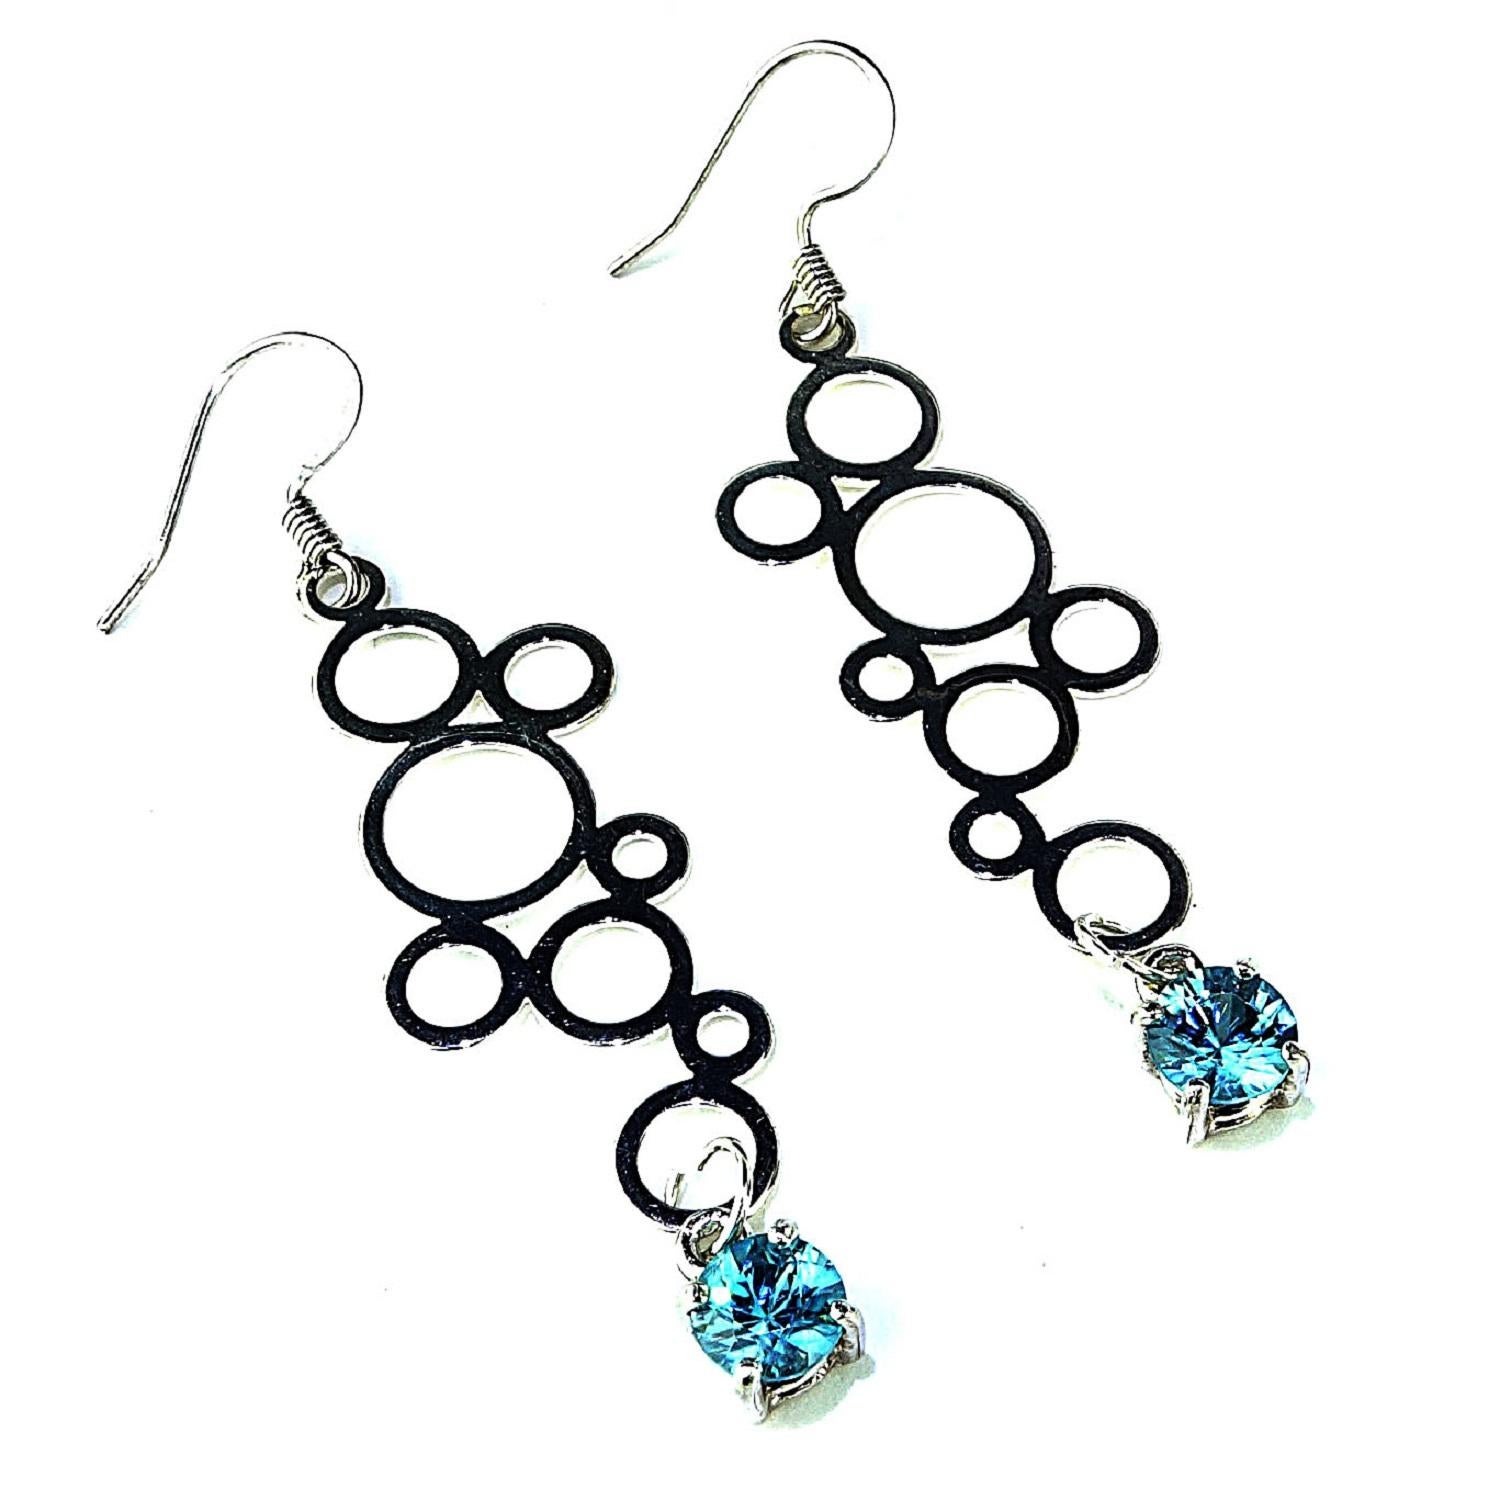 Round Cut AJD Elegant Sterling Silver Circles and Blue Sri Lankan Spinel Earrings 